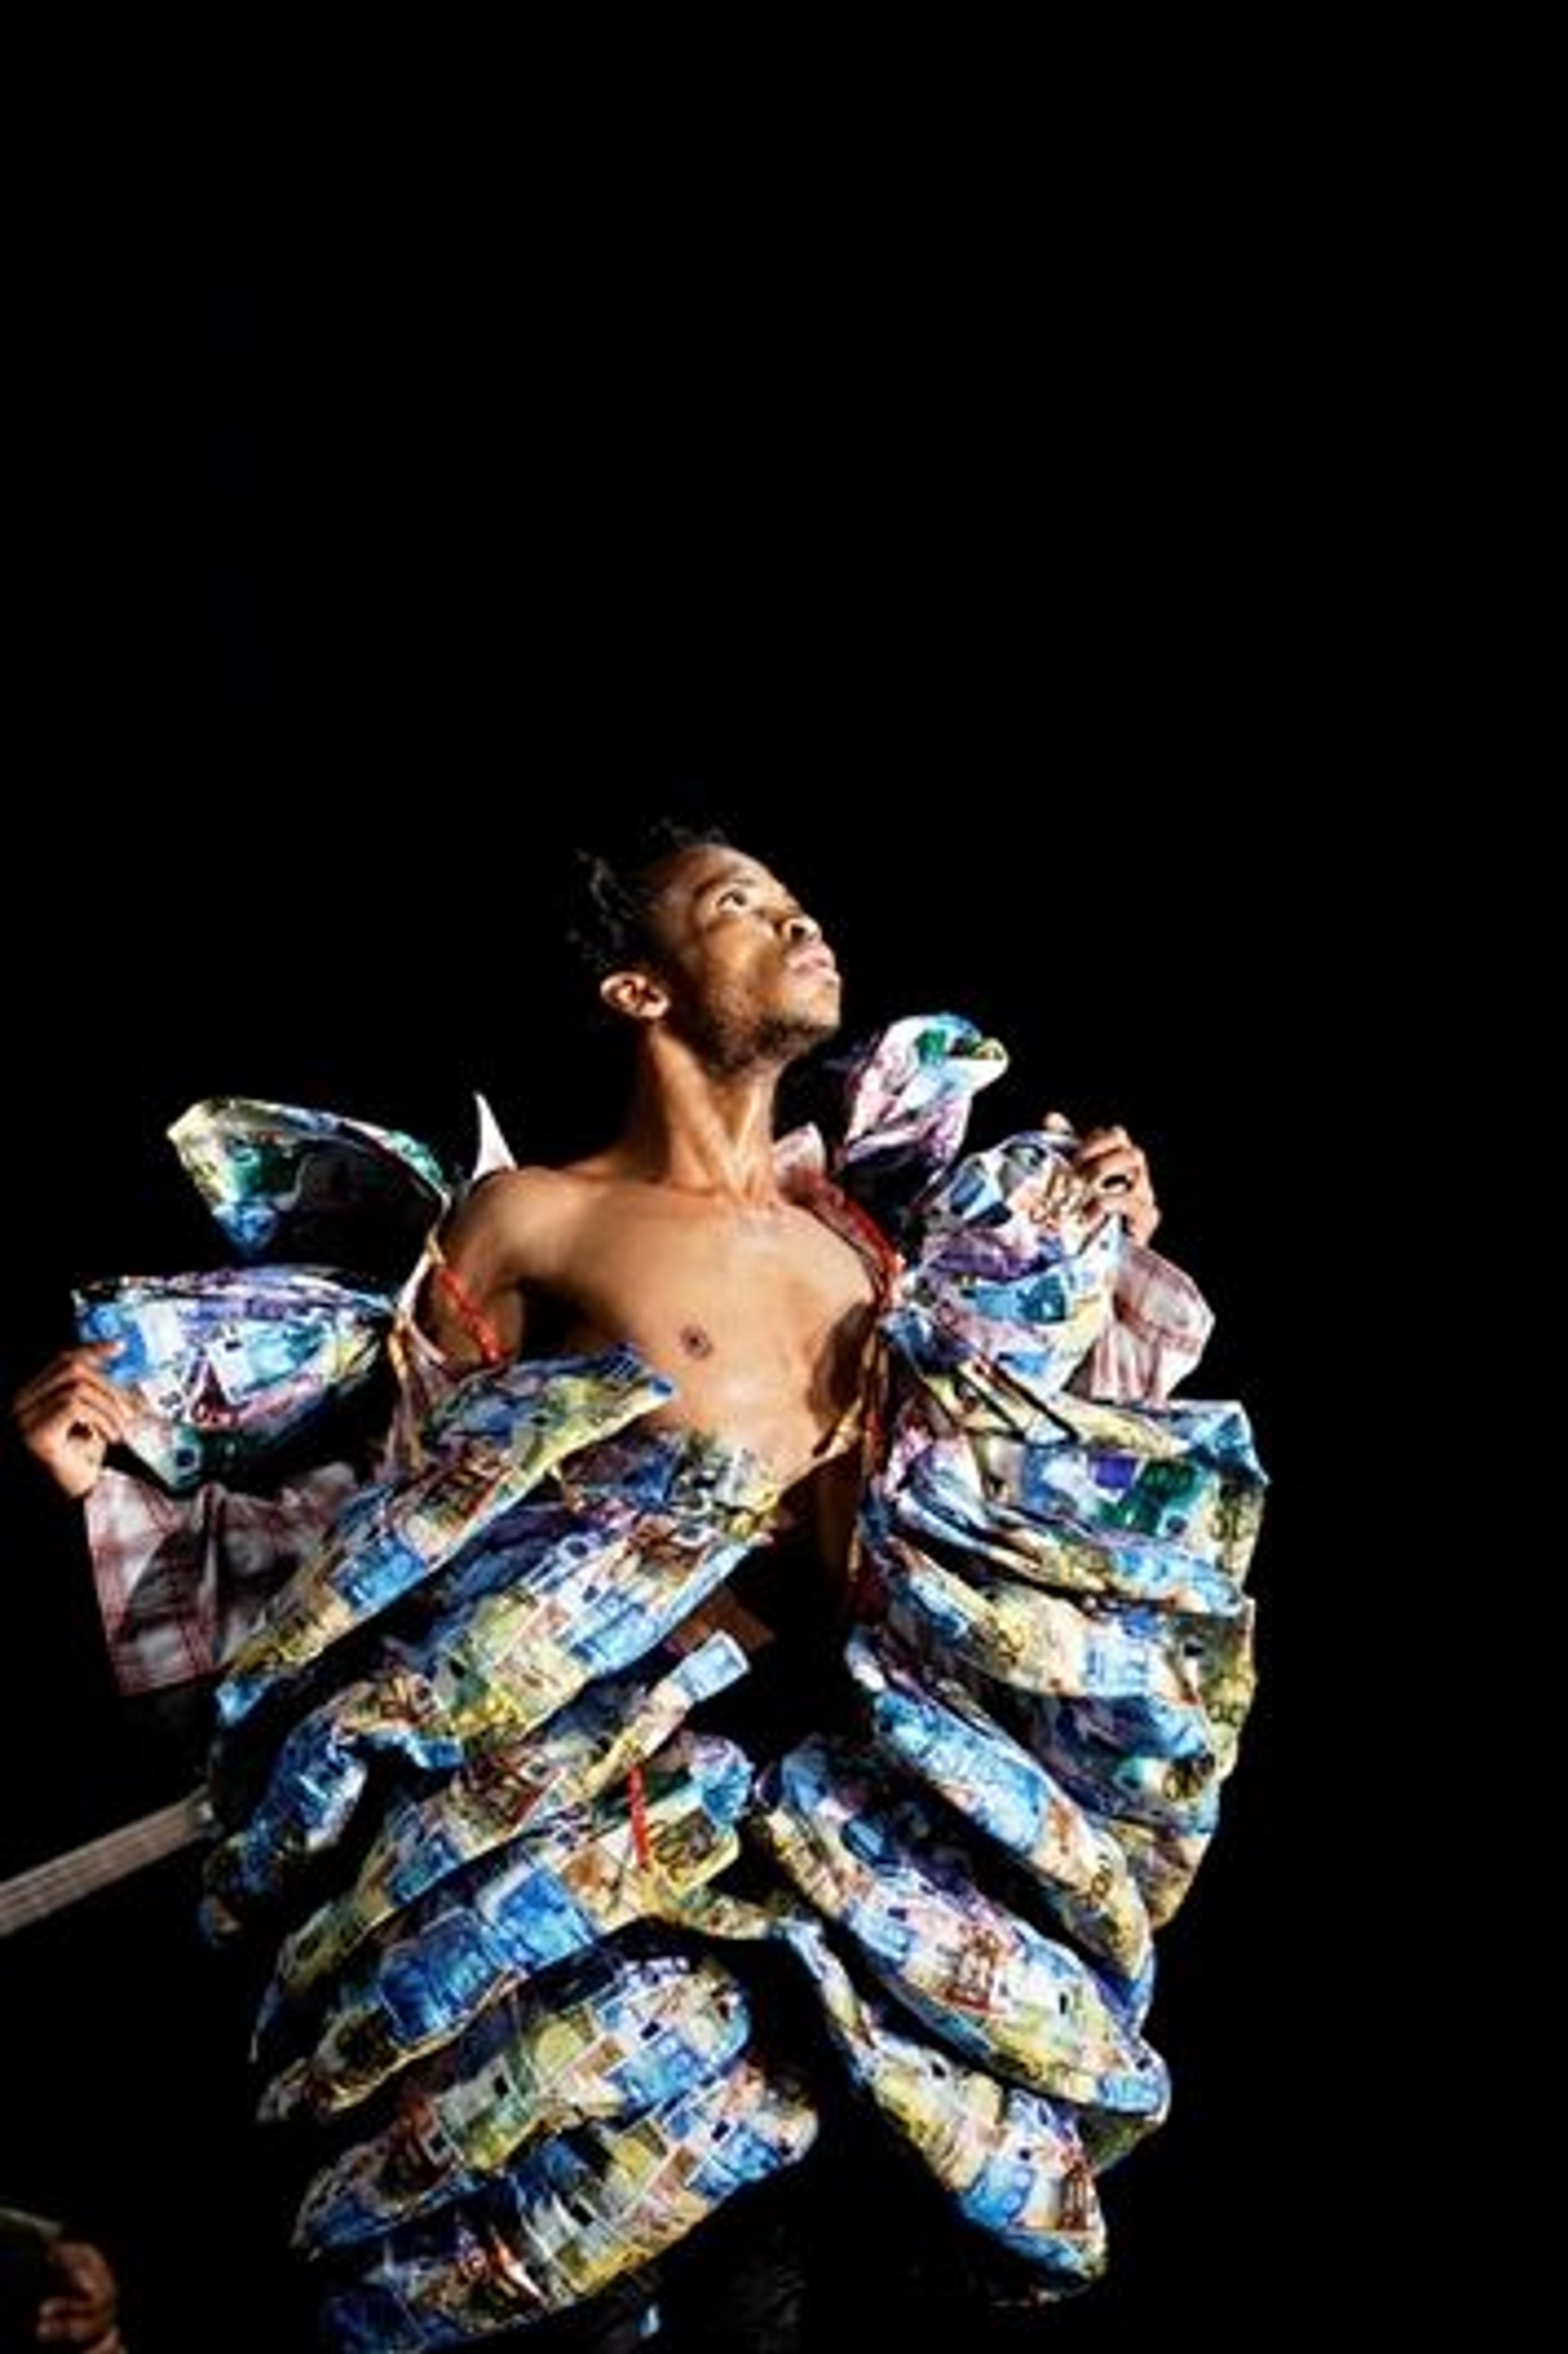 A male dancer against a black background wearing an elaborate costume made of different currencies